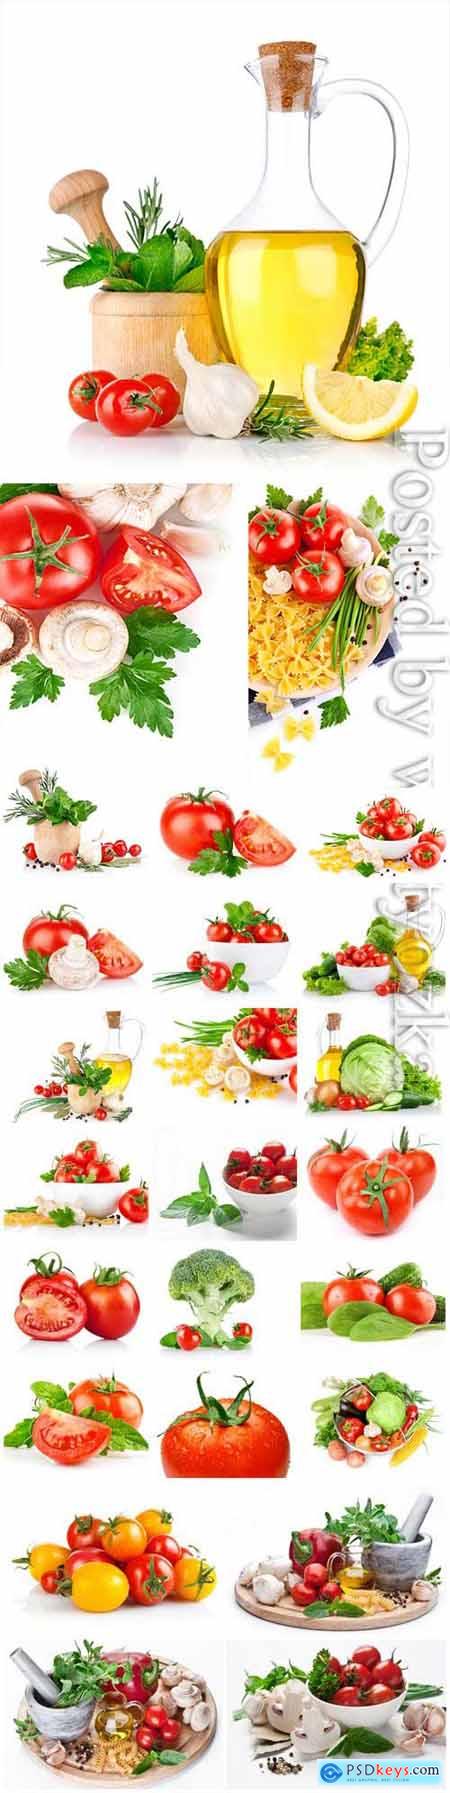 Fresh tomatoes, herbs, spices and oil stock photo